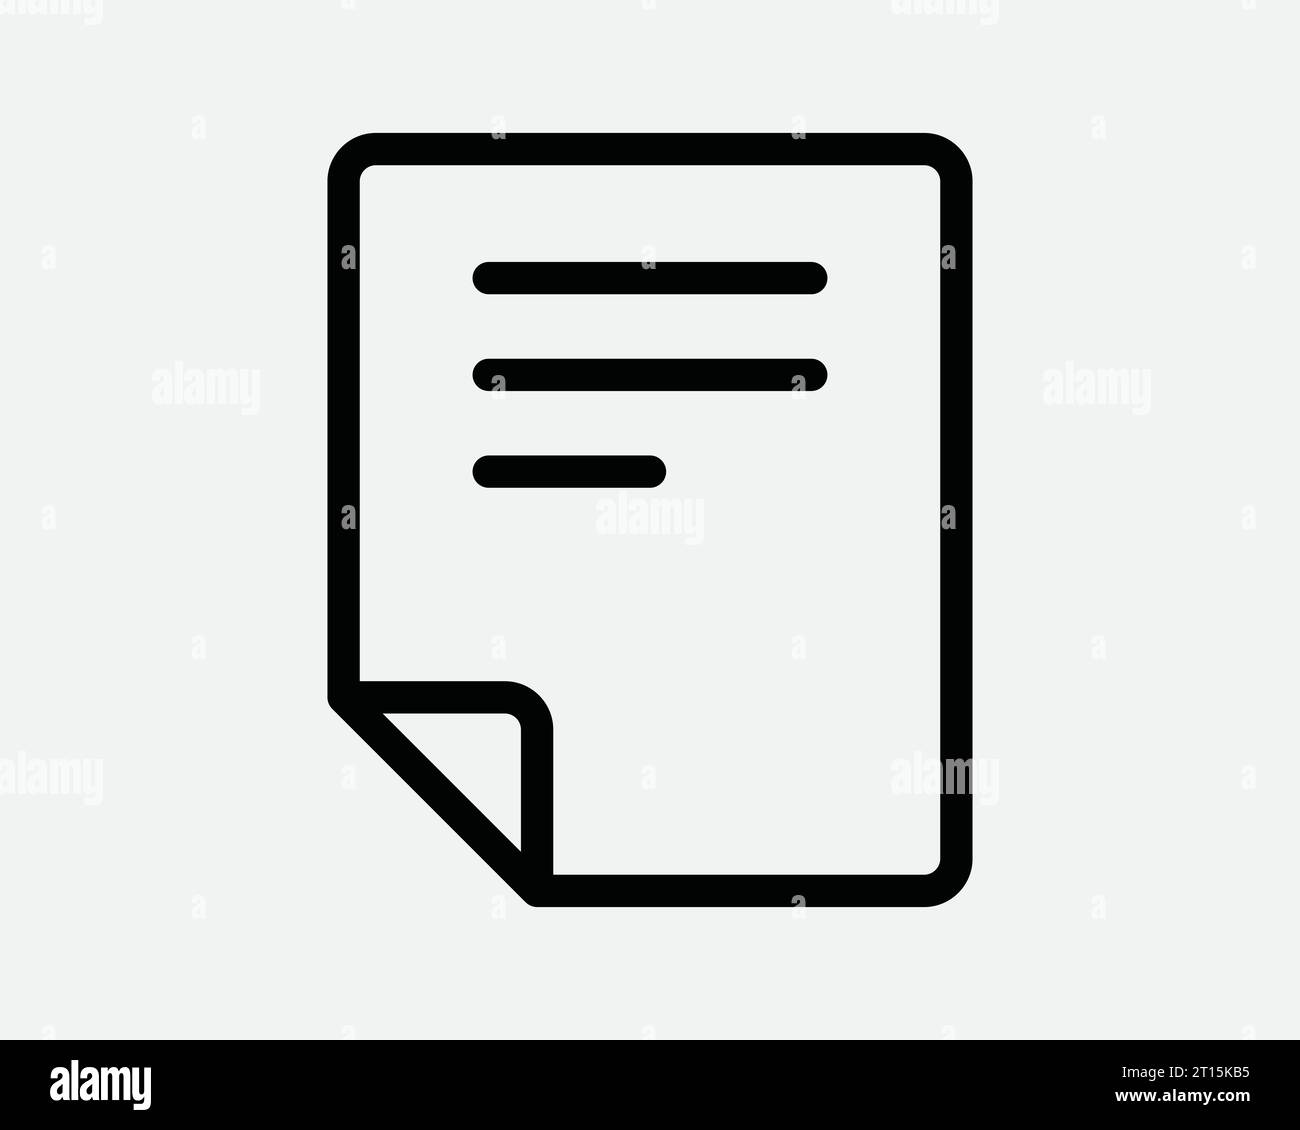 Note Line Icon Notepad Paper Sheet File Document Page Message Memo Label Fold Contract Office Black White Thin Outline Shape Sign Symbol EPS Vector Stock Vector